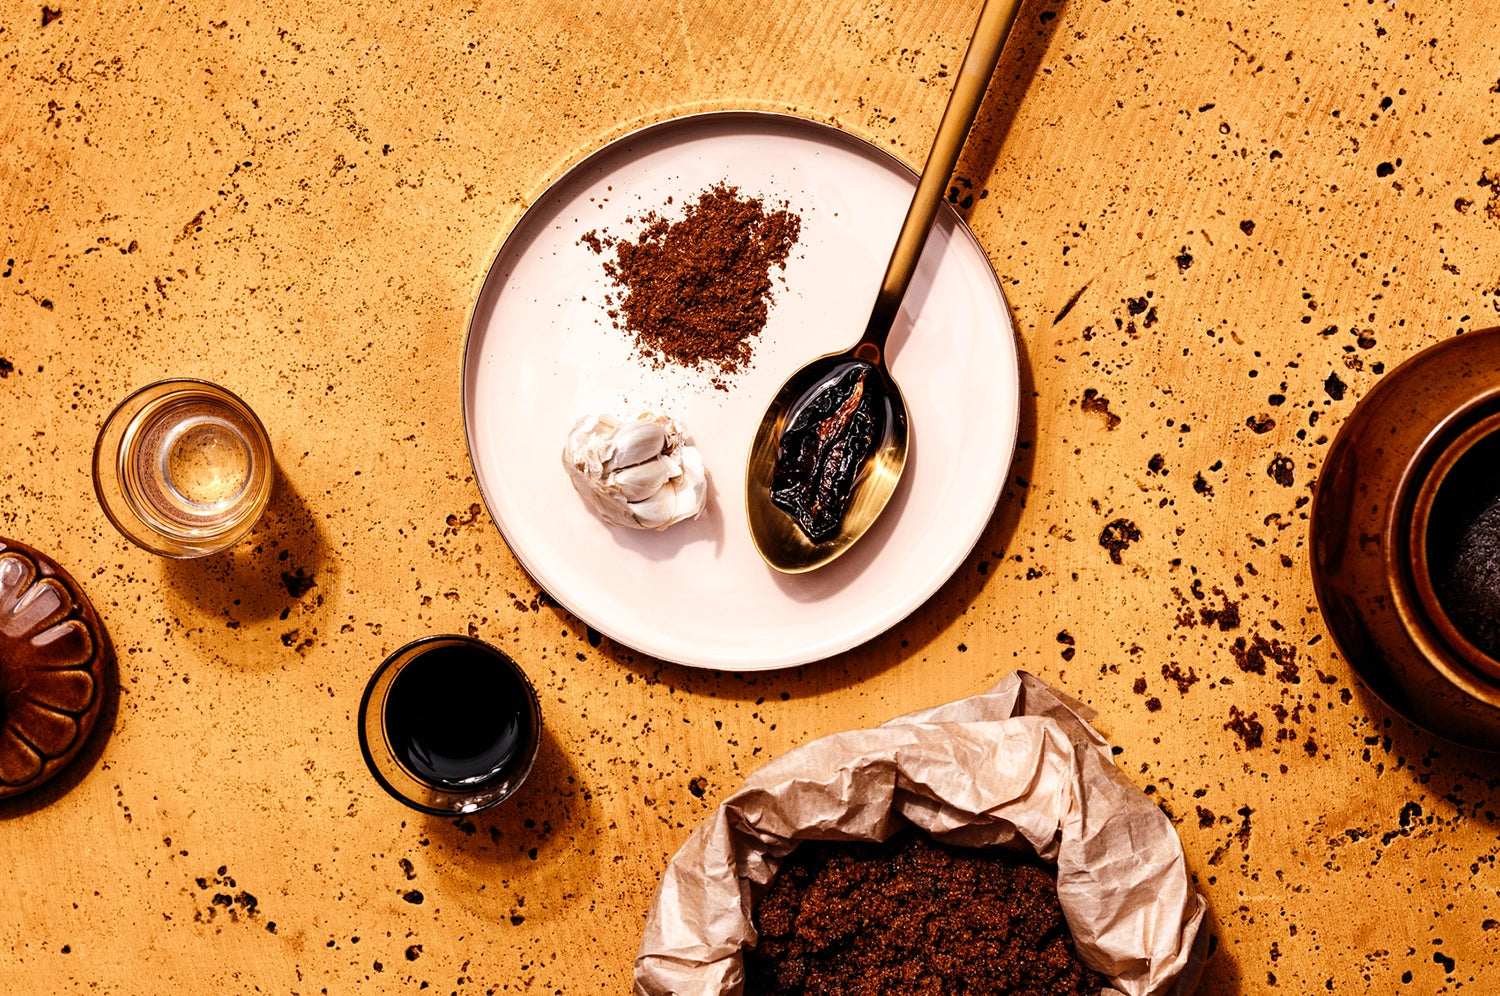 An overhead view of spices arranged on a plate with spoons sprinkled alongside on the counter.